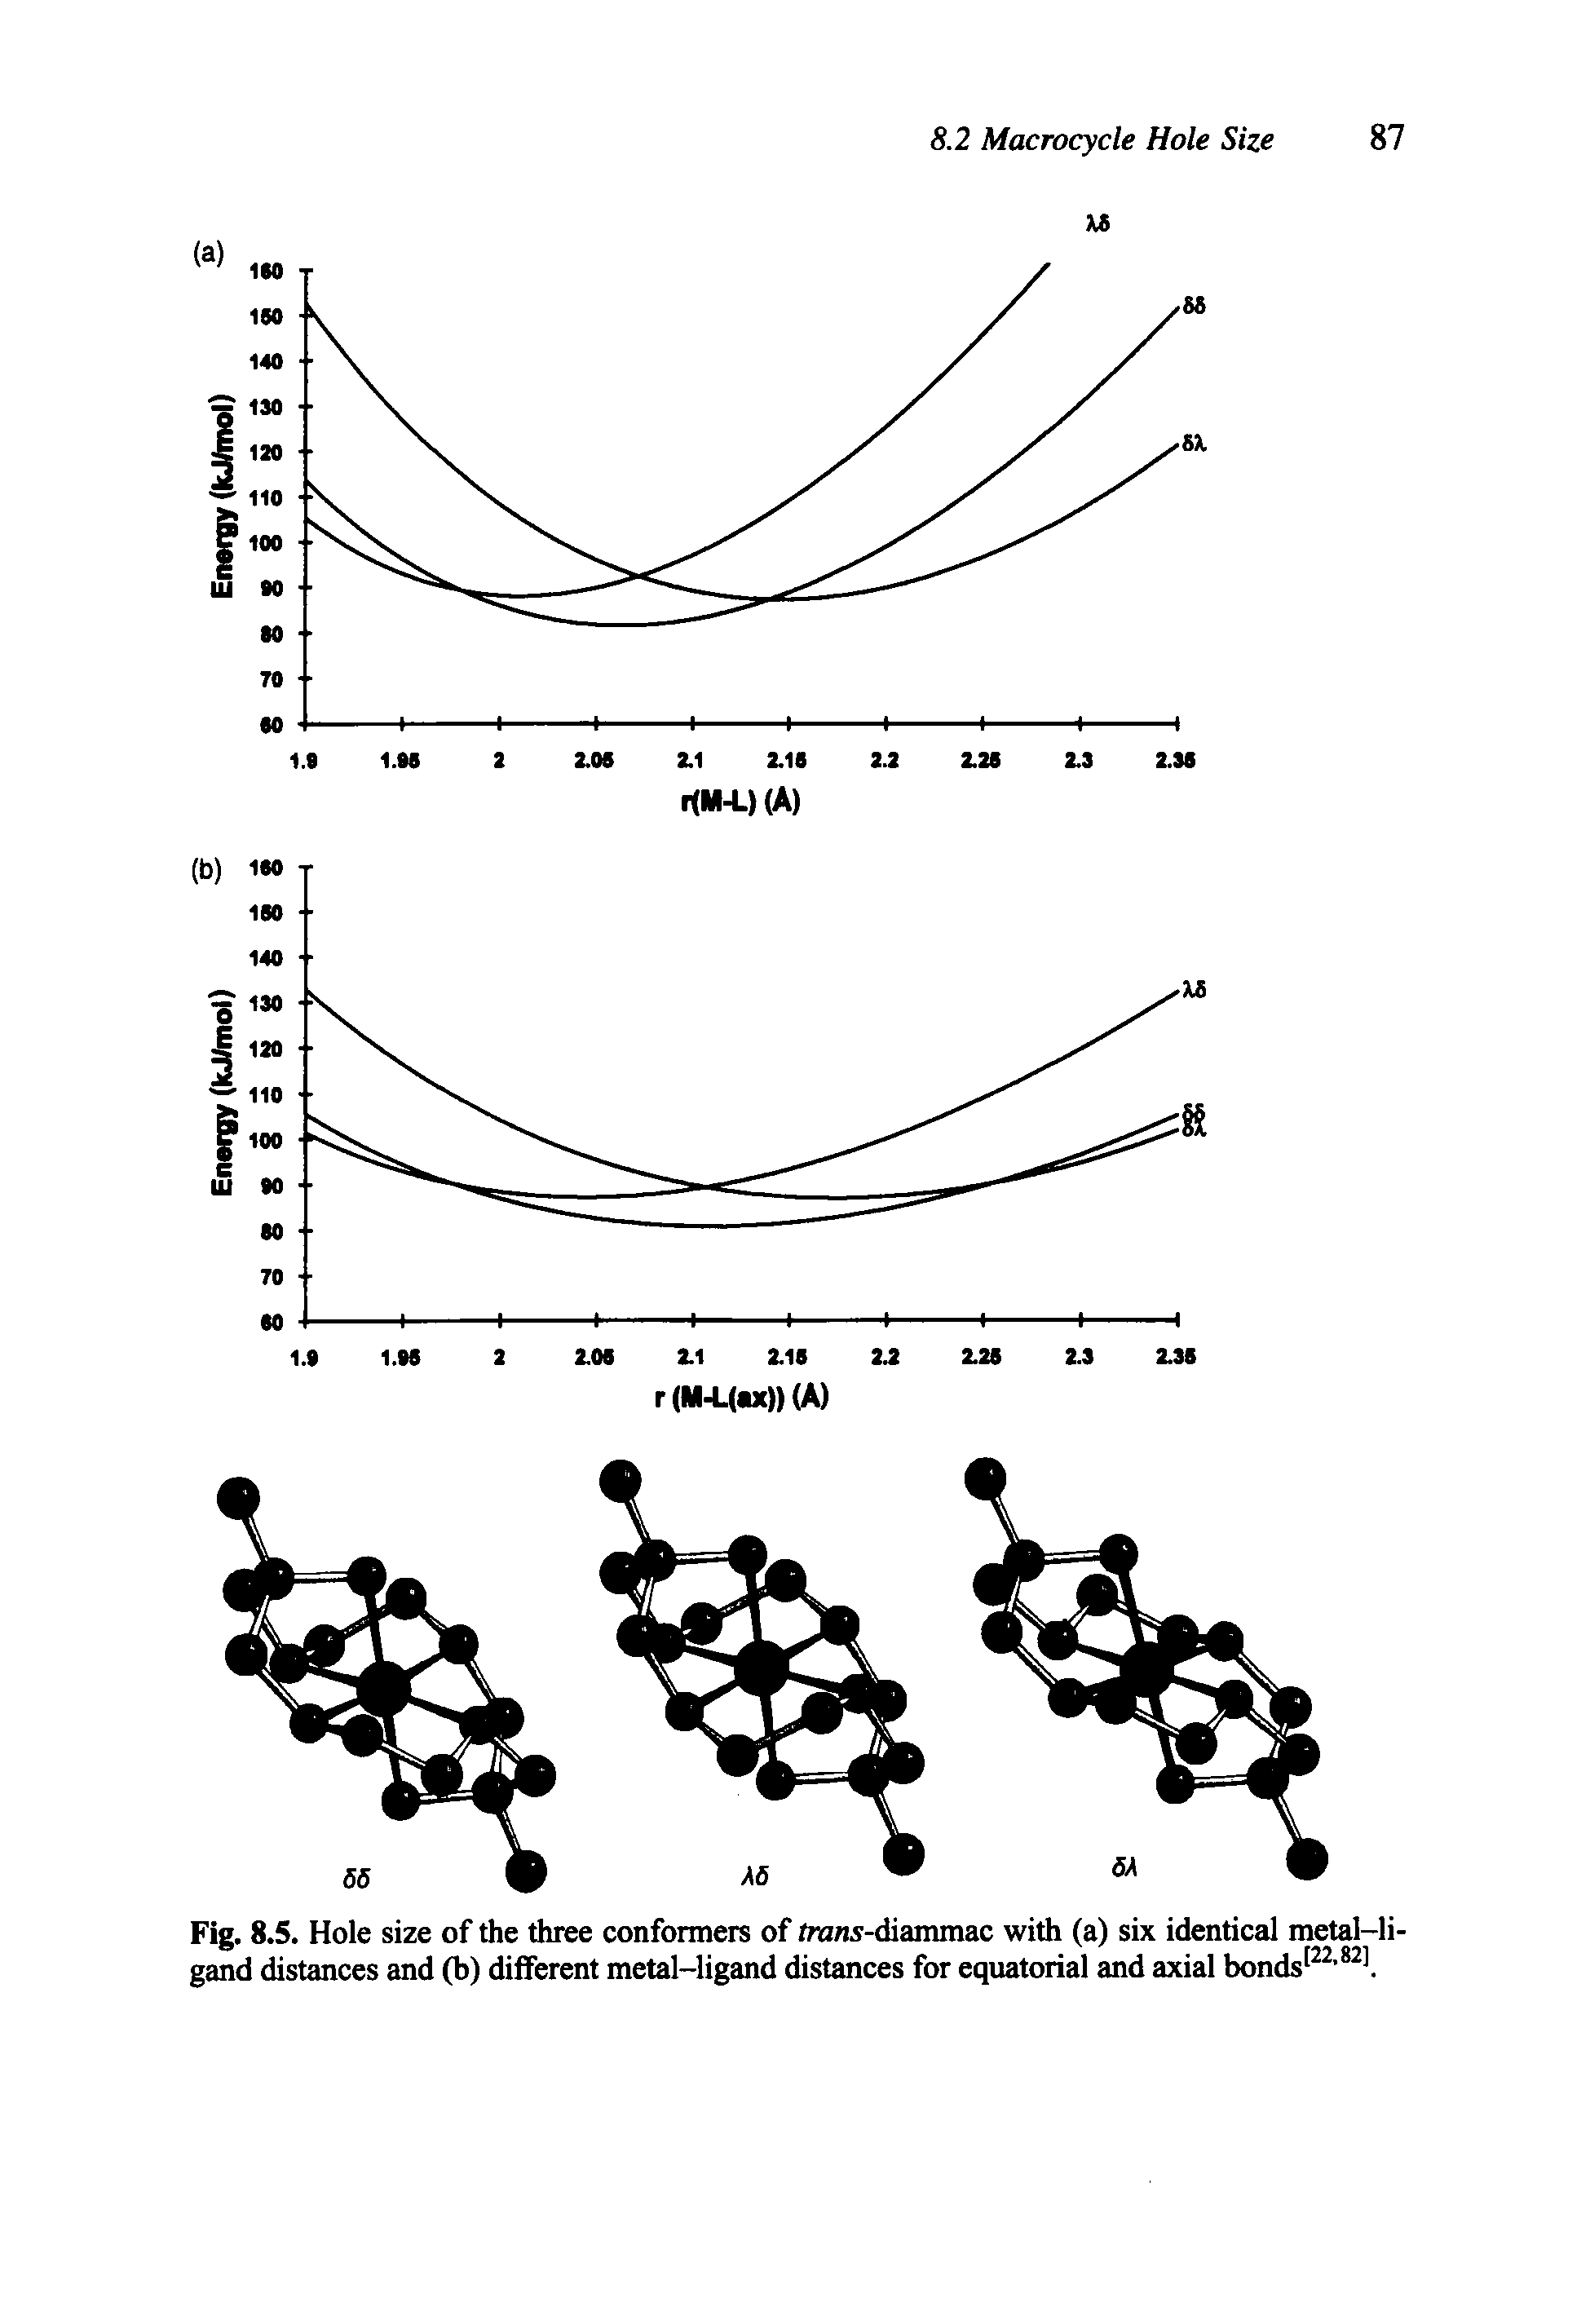 Fig. 8.5. Hole size of the three conformers of /raws-diammac with (a) six identical metal-ligand distances and (b) different metal-ligand distances for equatorial and axial bonds122,821.